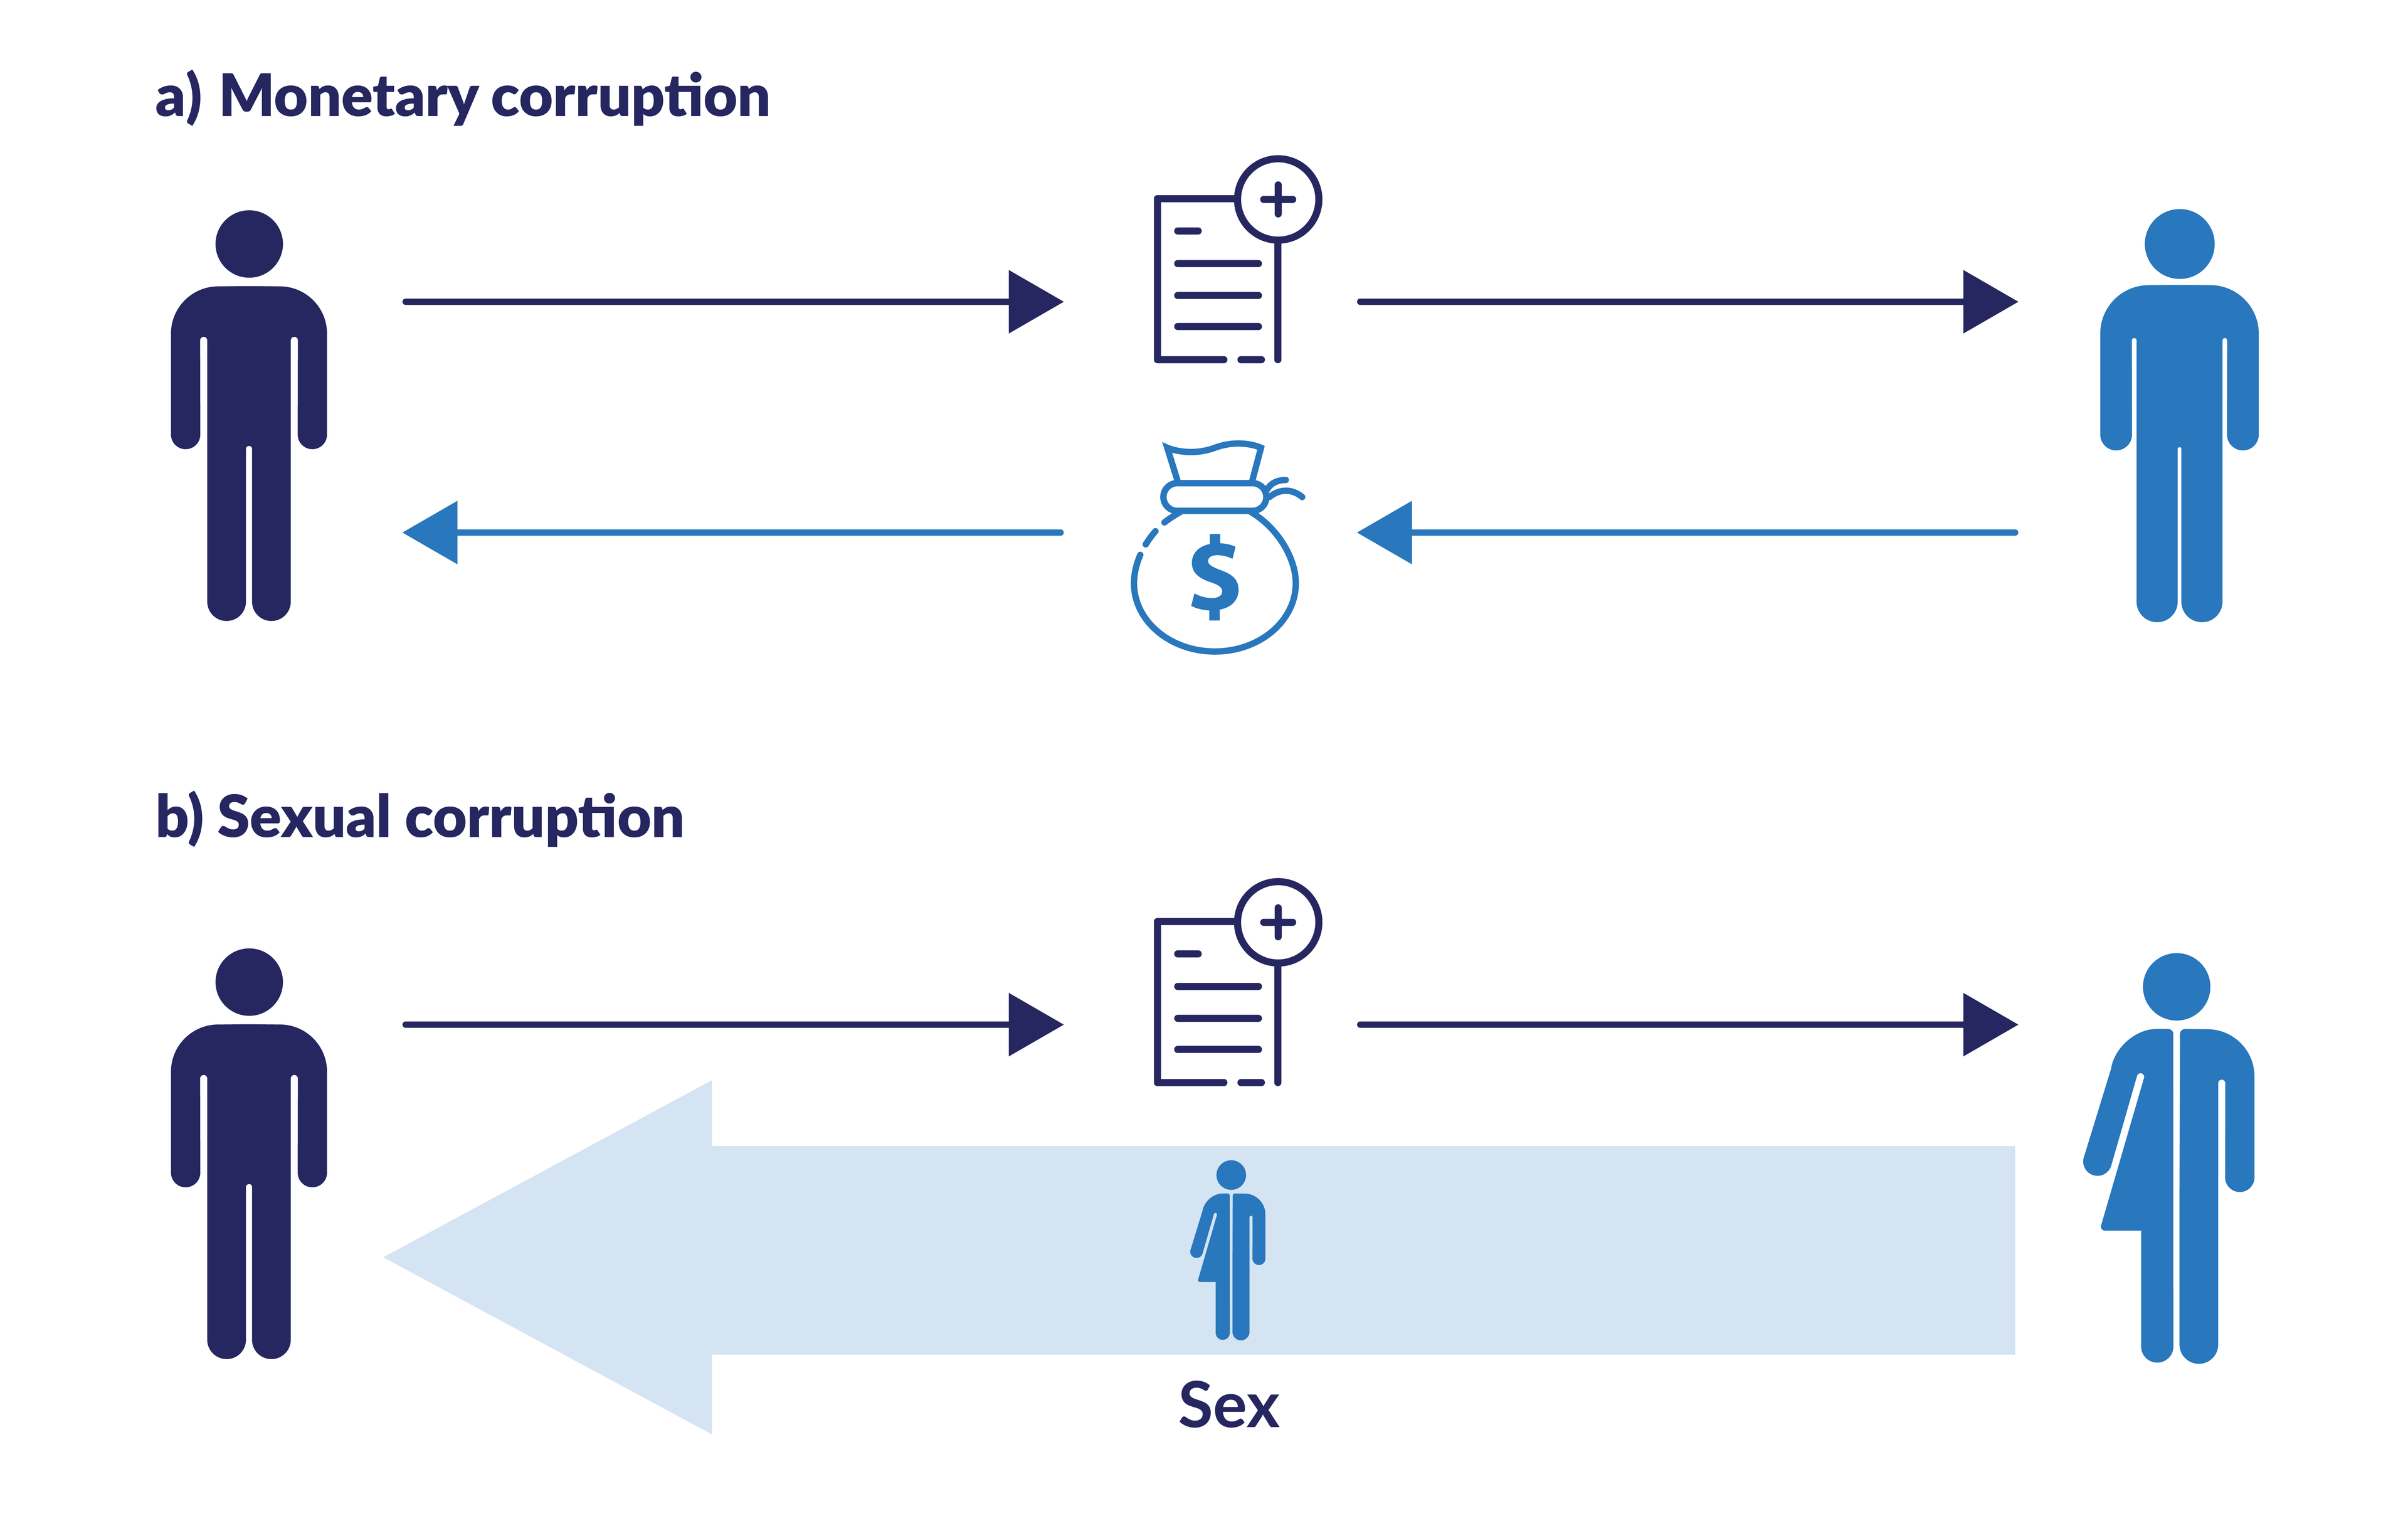 Illustrative figure showing two transaction types. Type a is called ‘Monetary corruption’, in which a person provides a service, benefit, or advantage to someone and the recipient provides money in return. Type b is called ‘sexual corruption’ and the illustration shows that the recipient of the service is exchanging their whole selves or their body, and not money, for the service or advantage.